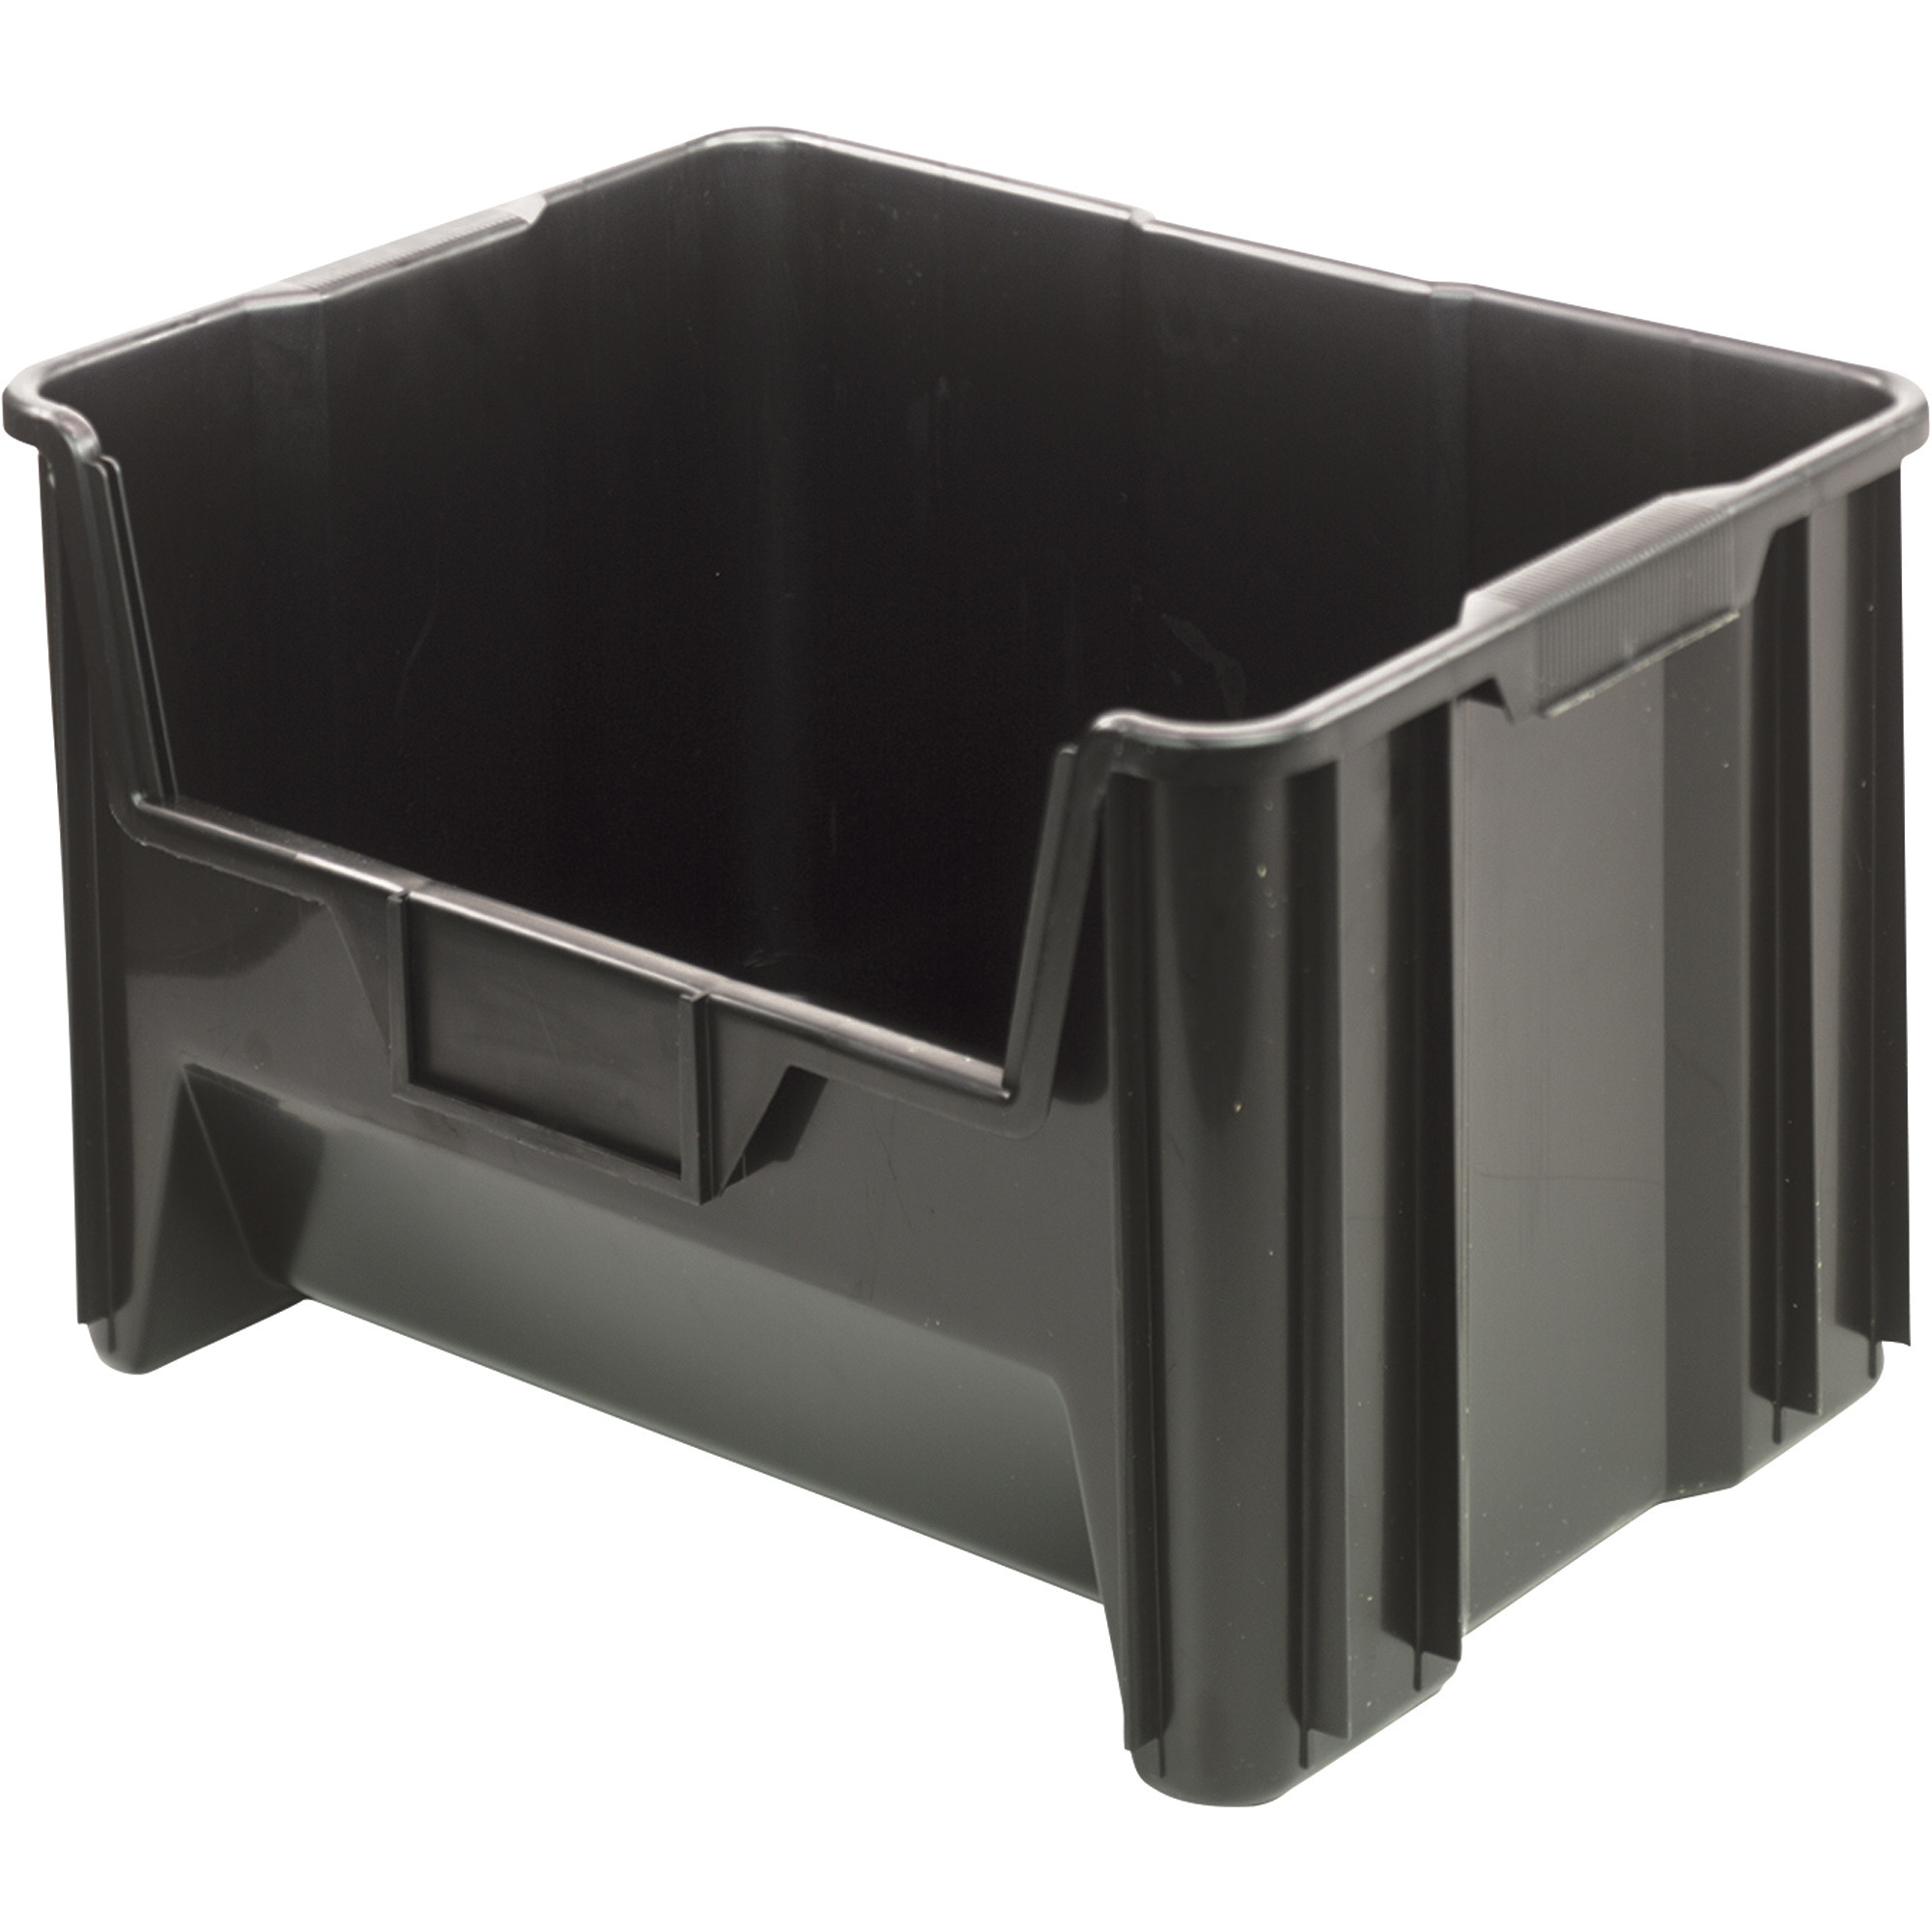 Quantum Storage Giant Stack Container, 3-Pack, 15 1/4Inch L x 19 7/8Inch W x 12 7/16Inch H, Black, Model QGH700BKCS